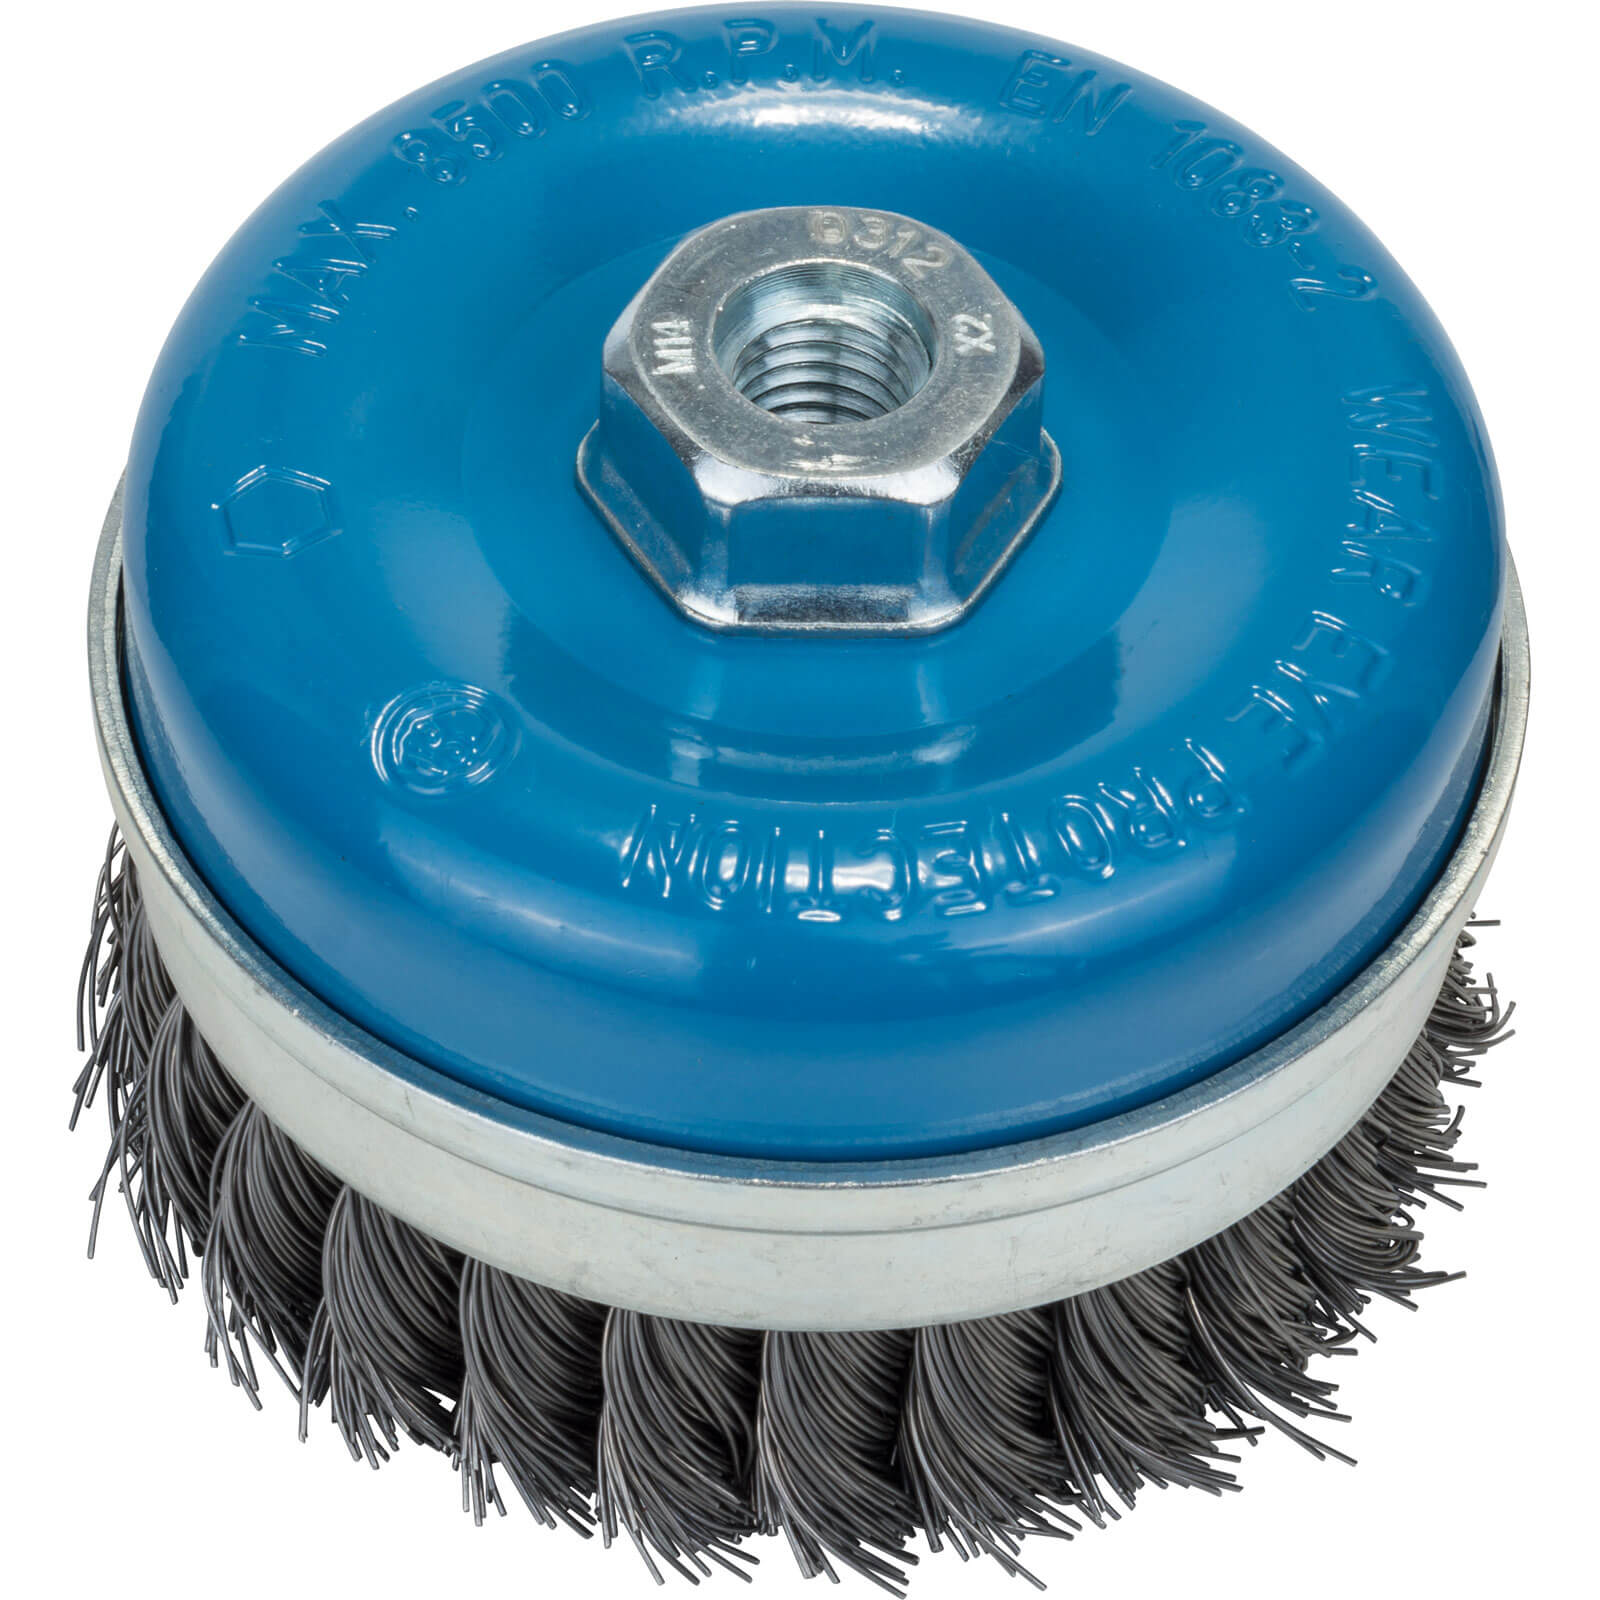 Photo of Bosch 0.5mm Knotted Steel Wire Cup Brush 100mm M14 Thread